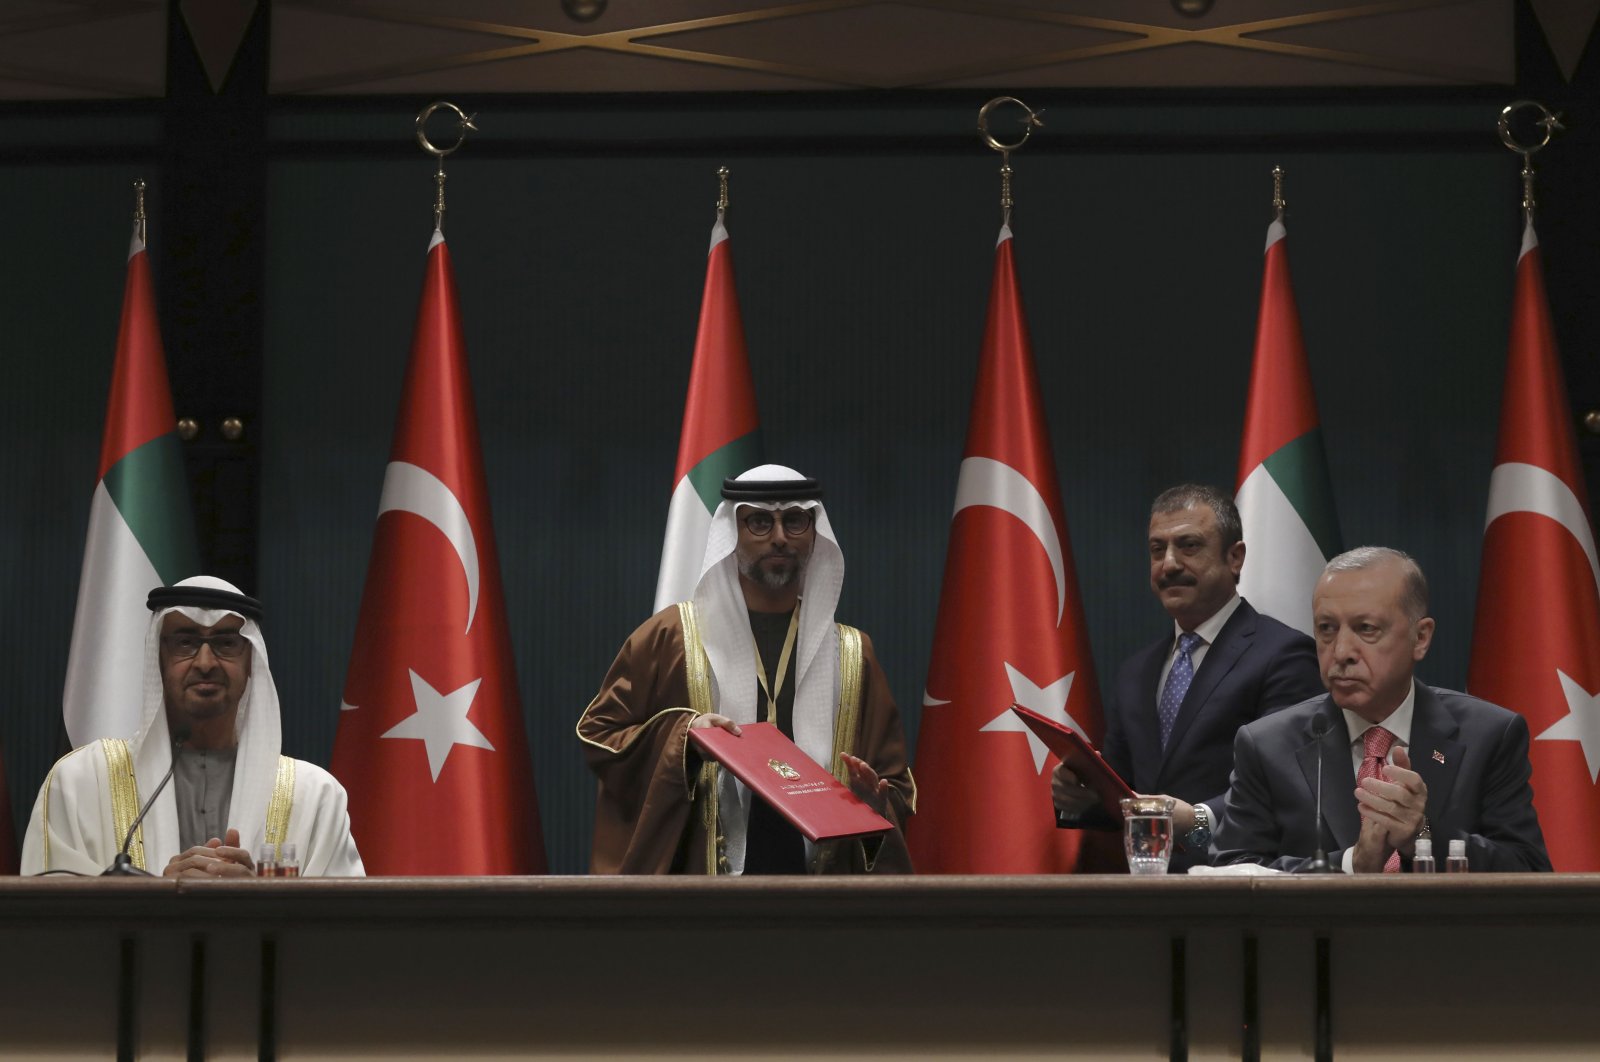 President Recep Tayyip Erdoğan and Sheikh Mohammed bin Zayed Al Nahyan (MBZ), the Crown Prince of the United Arab Emirates (UAE) attend a signing ceremony at the presidential palace, in Ankara, Turkey, Nov. 24, 2021. (AP Photo)